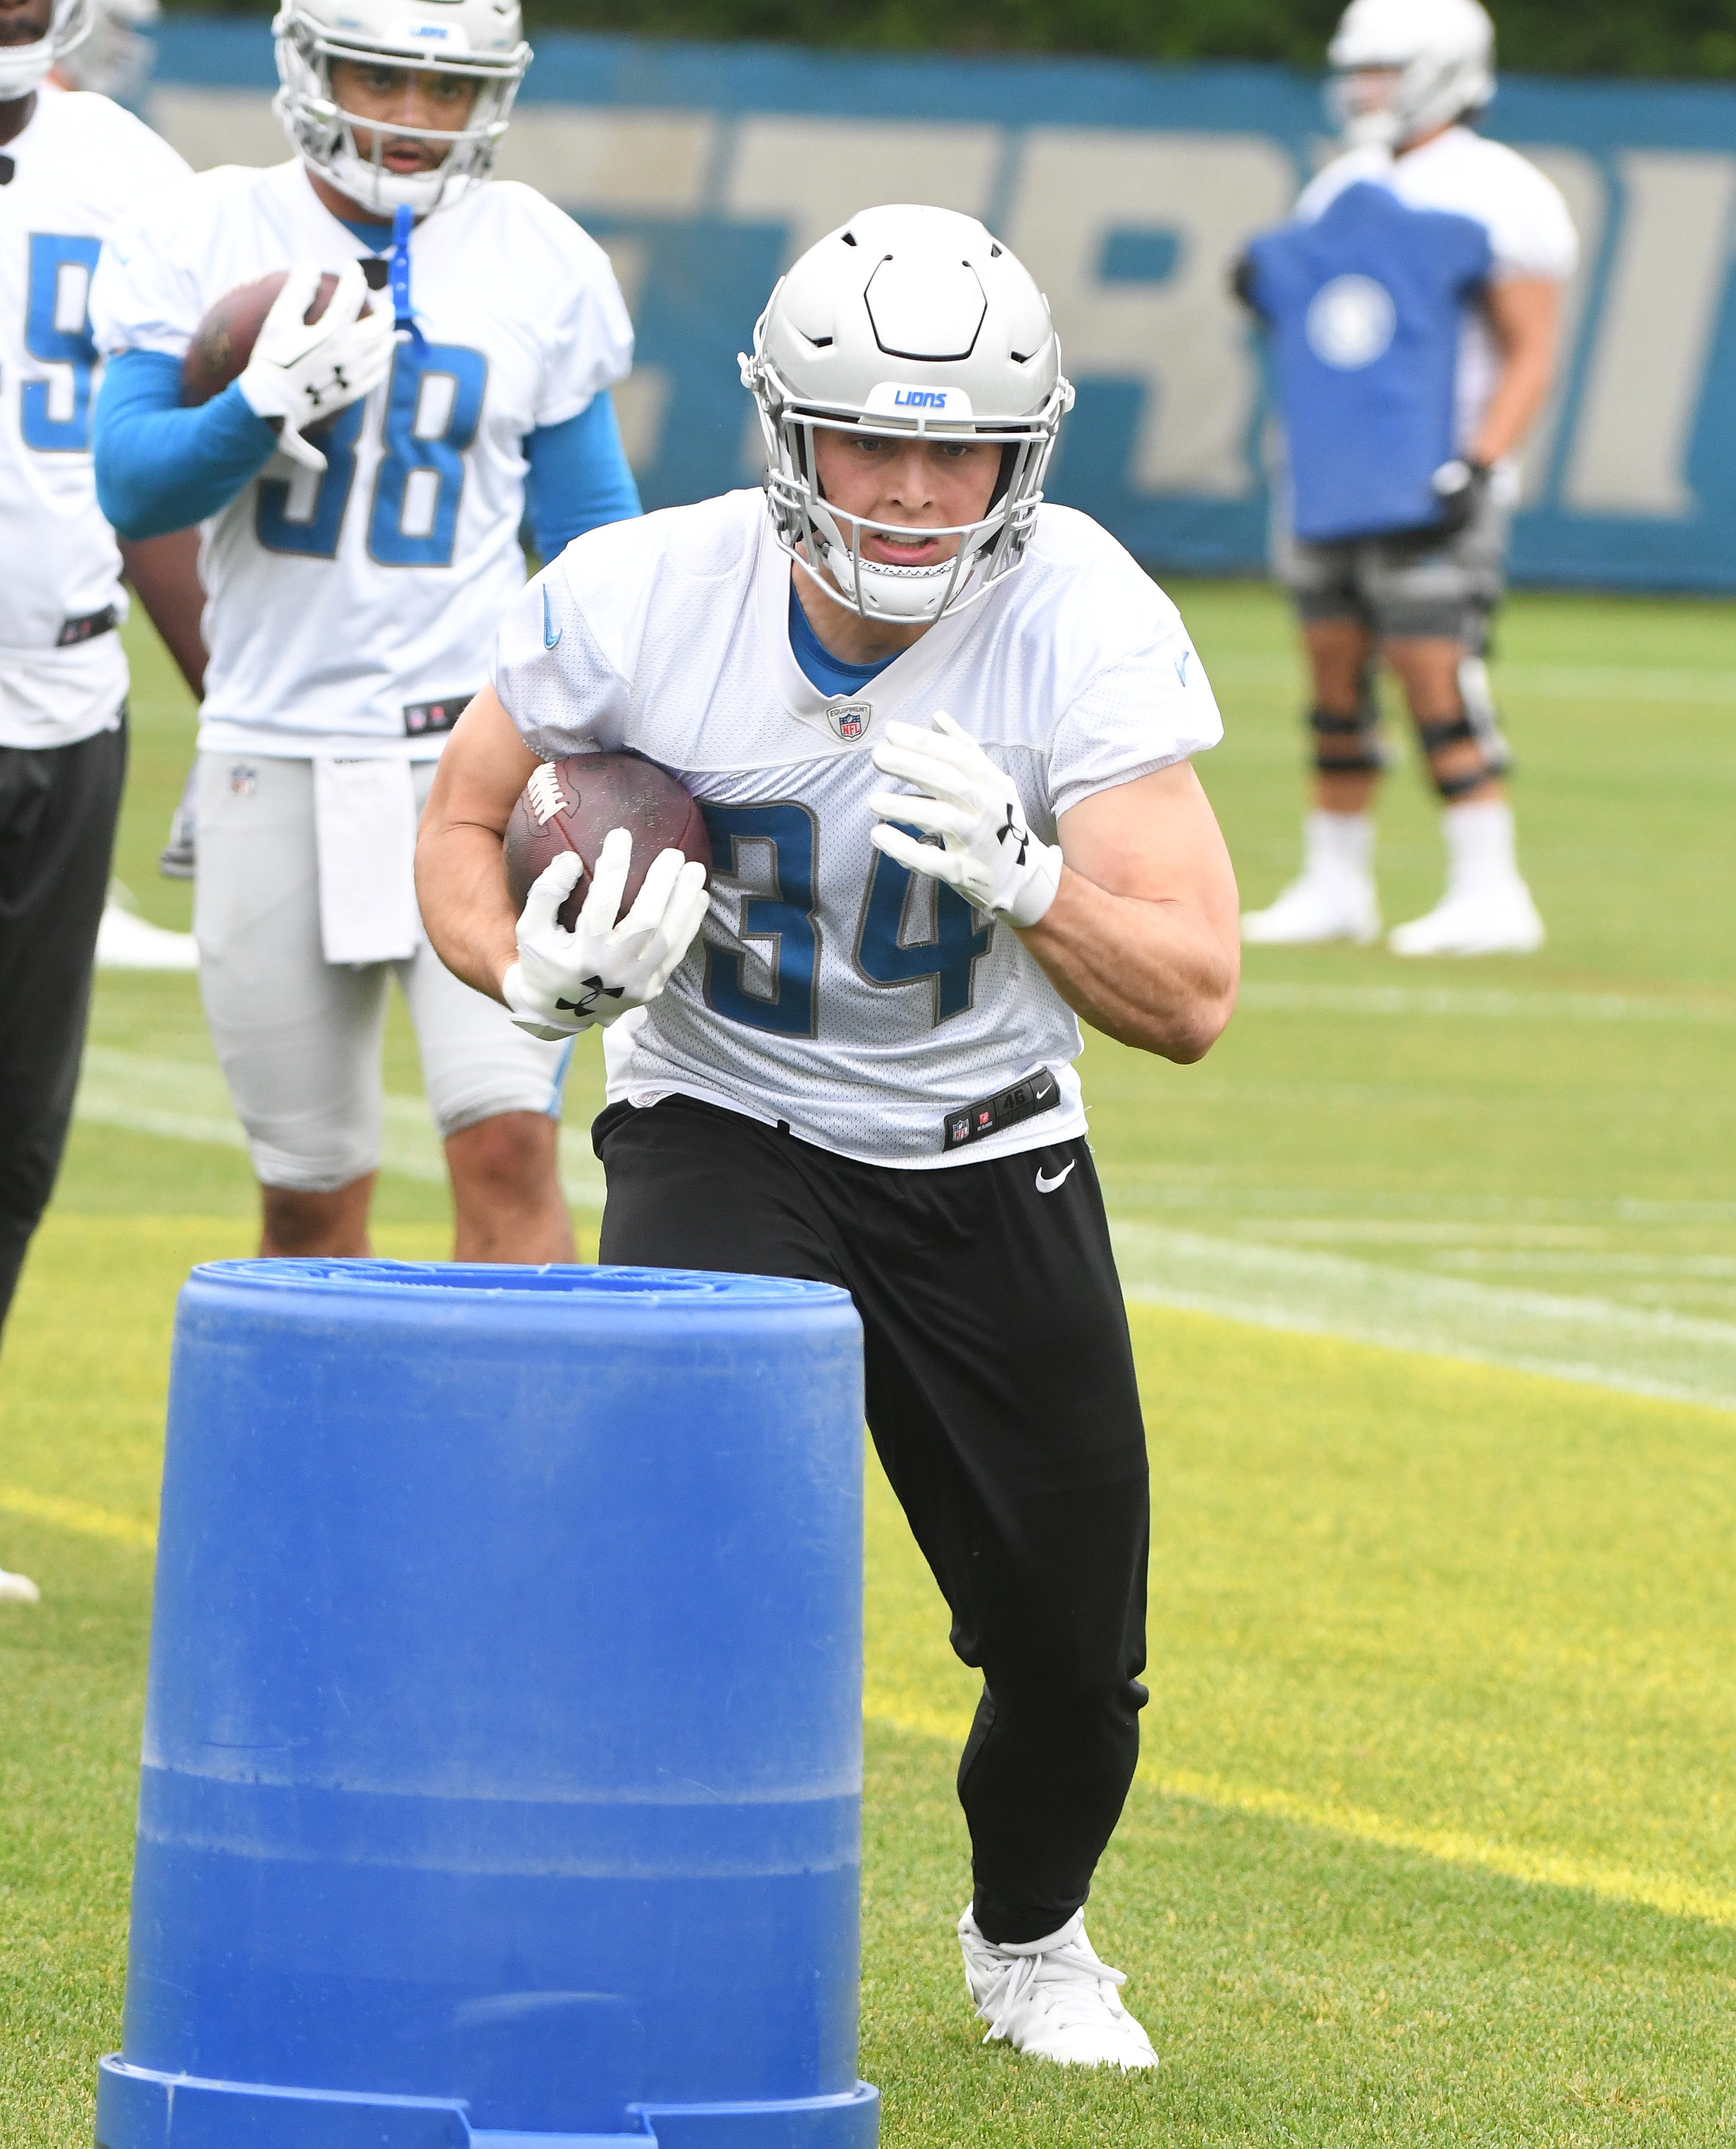 Lions running back Zach Zenner cuts around the obstacles during drills.